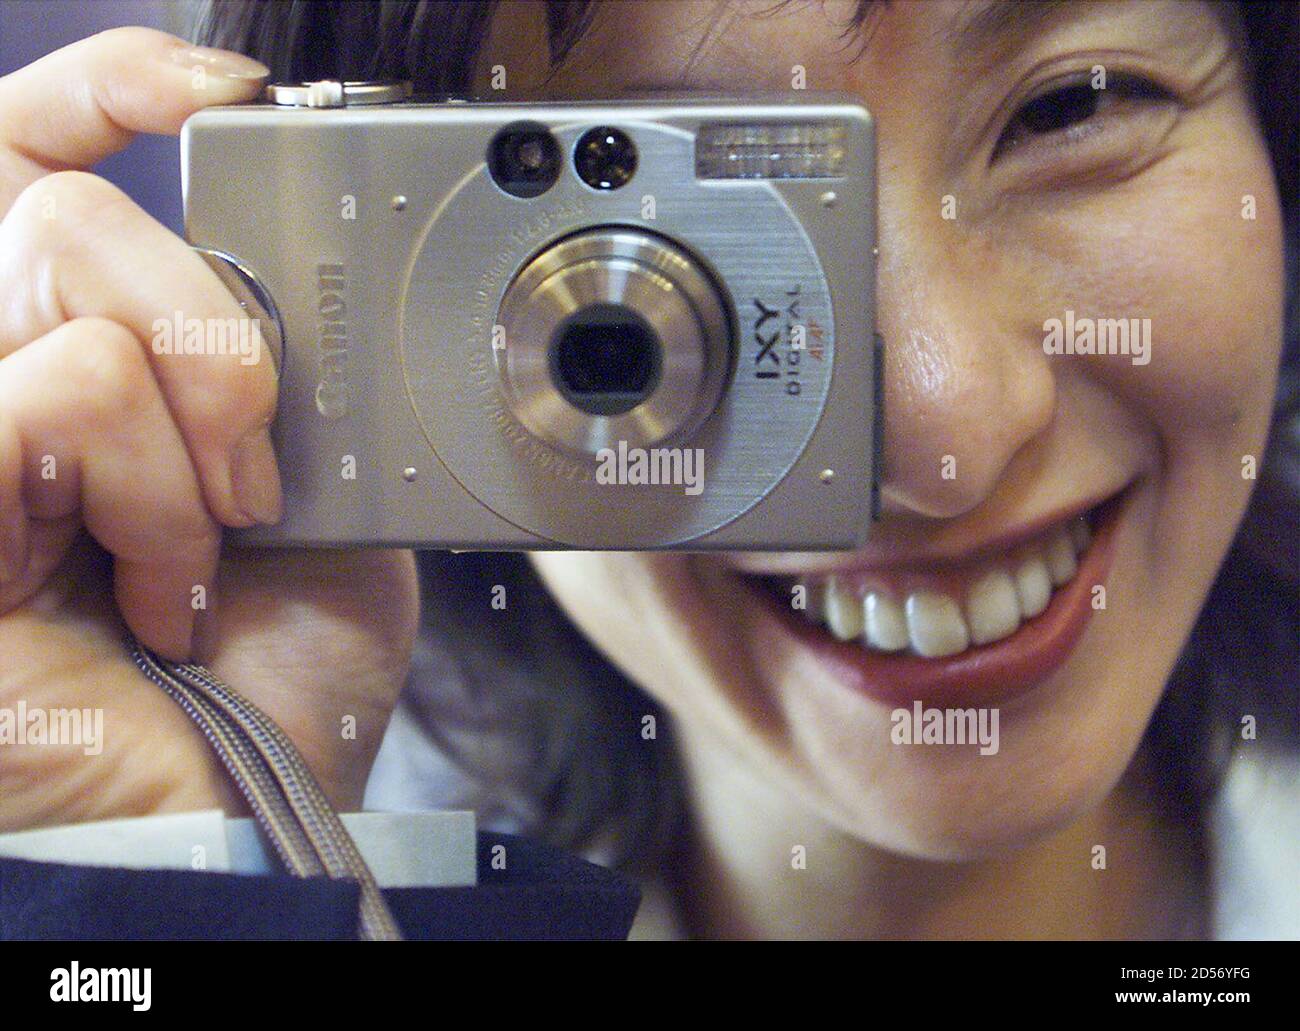 Canon Inc employee Yukiko Okamoto strikes a pose with what they say is "the  world's smallest and lightest 2-megapixel-class optical zoom digital camera,"  IXY DIGITAL at an unveiling at a Tokyo hotel